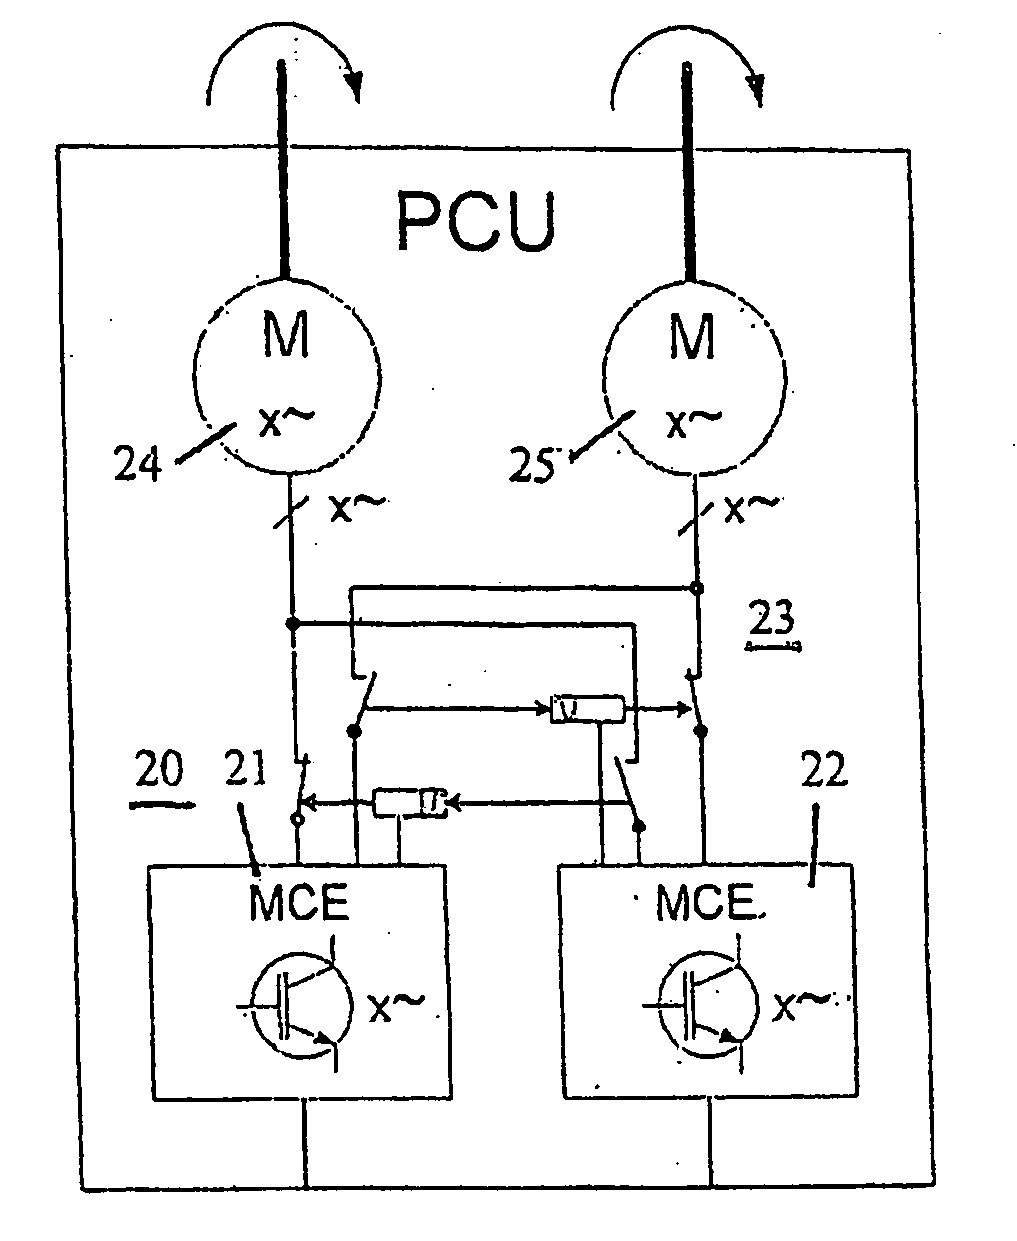 Method and Device for Redundantly Supplying Several Electric Servomotors or Drive Motors by Means of a Common Power Electronics Unit